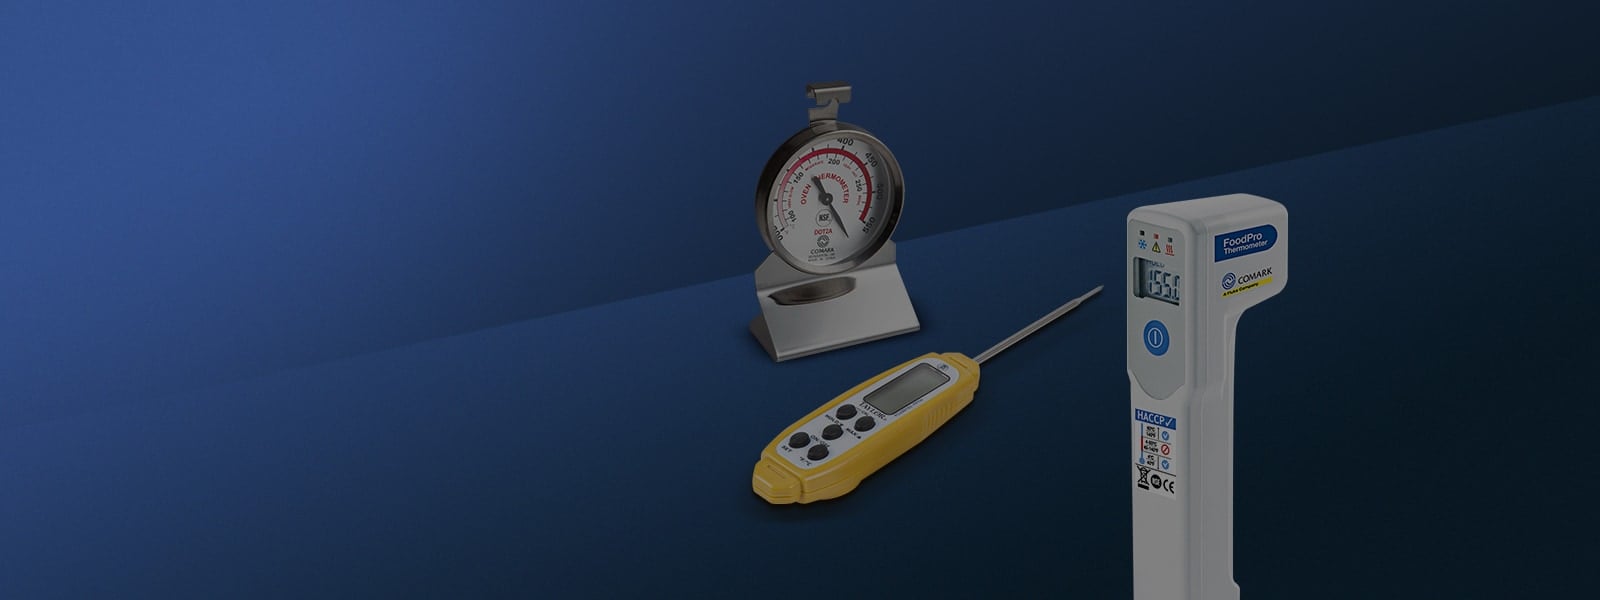 Food Thermometers & Timers